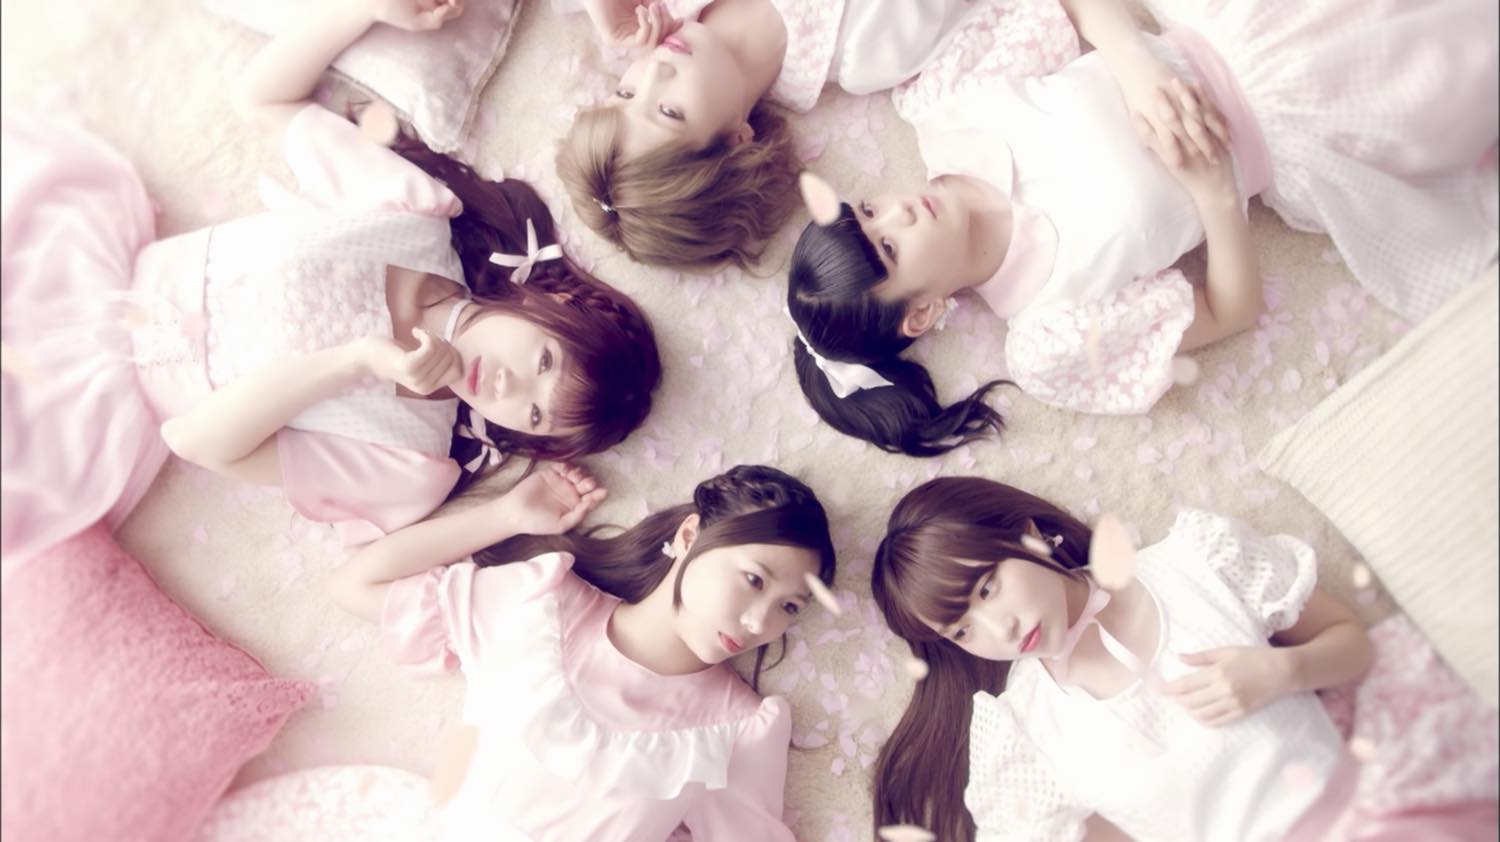 Go on a Date With Moso Calibration in the MV for “Sakurairo Diary”!